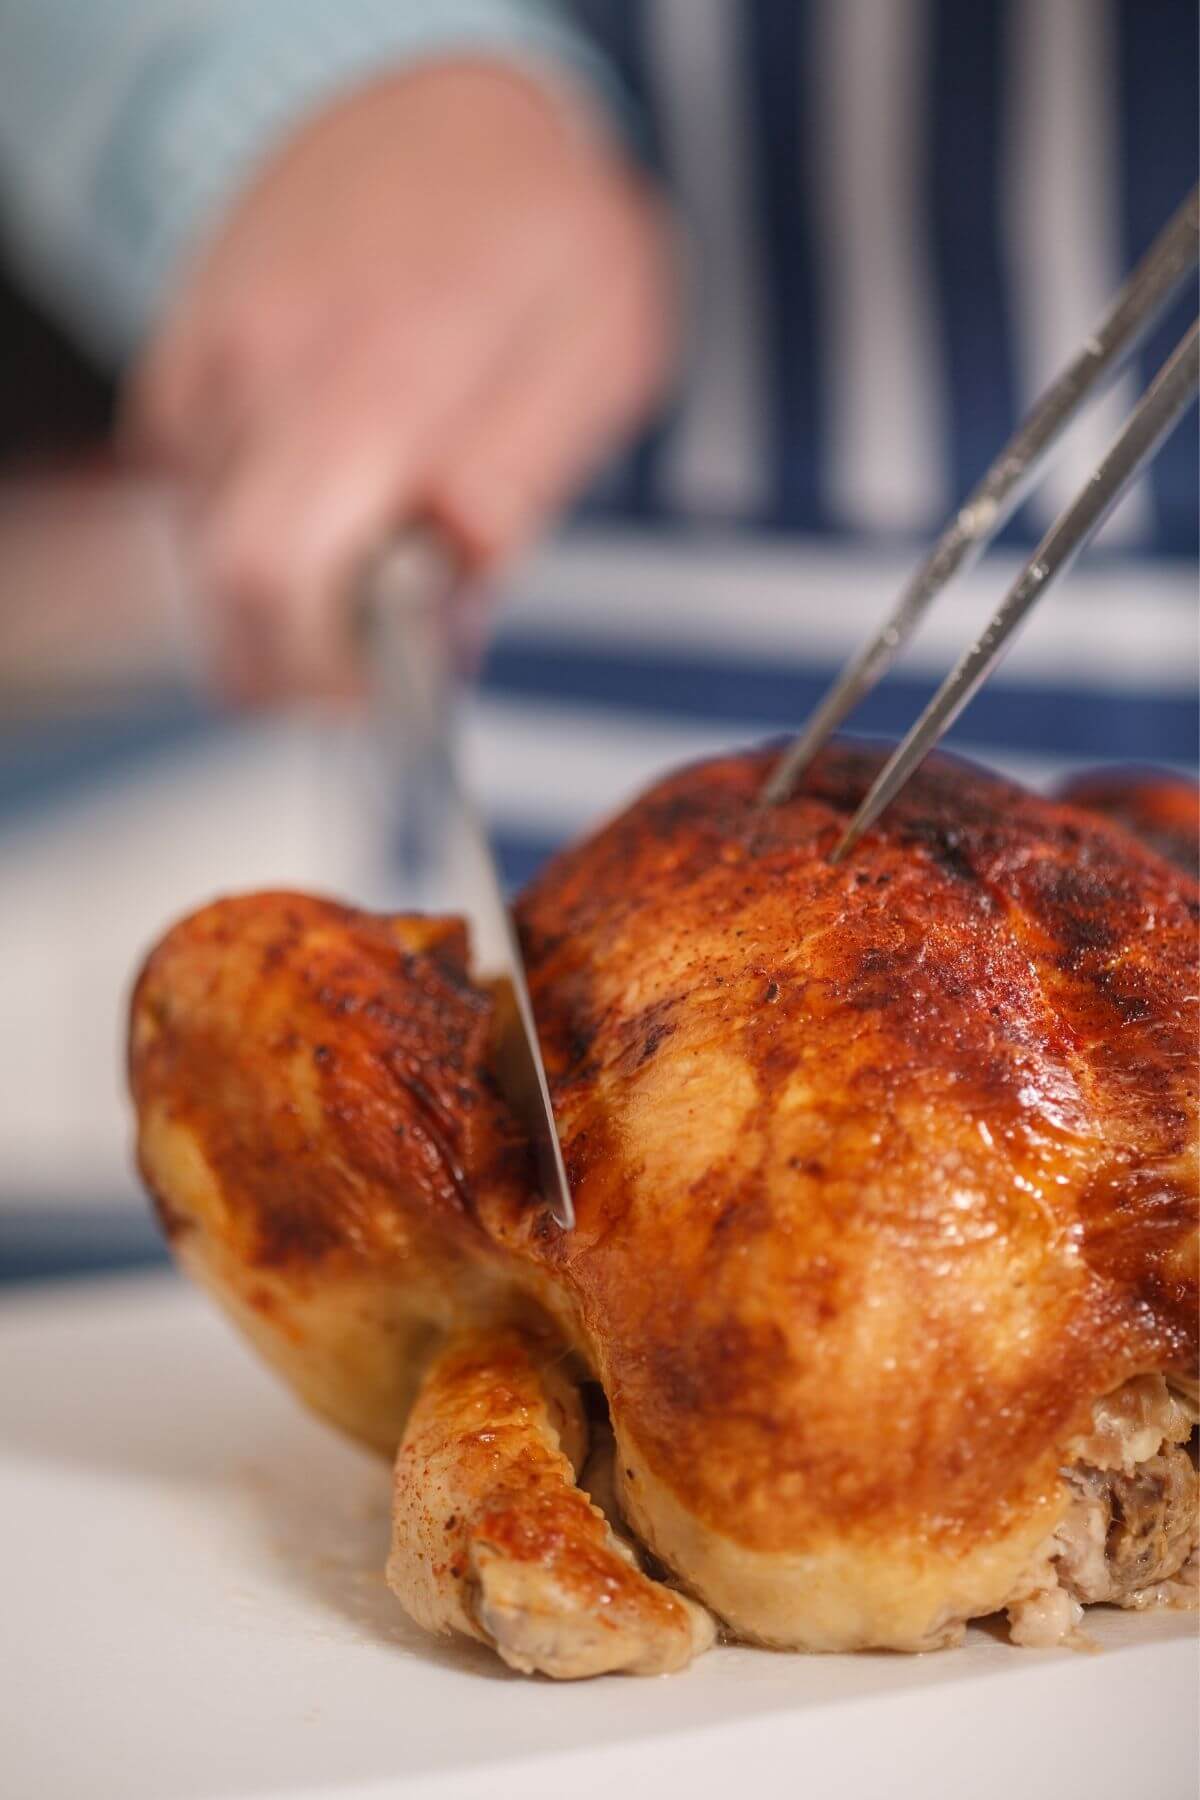 Carving a rotisserie chicken